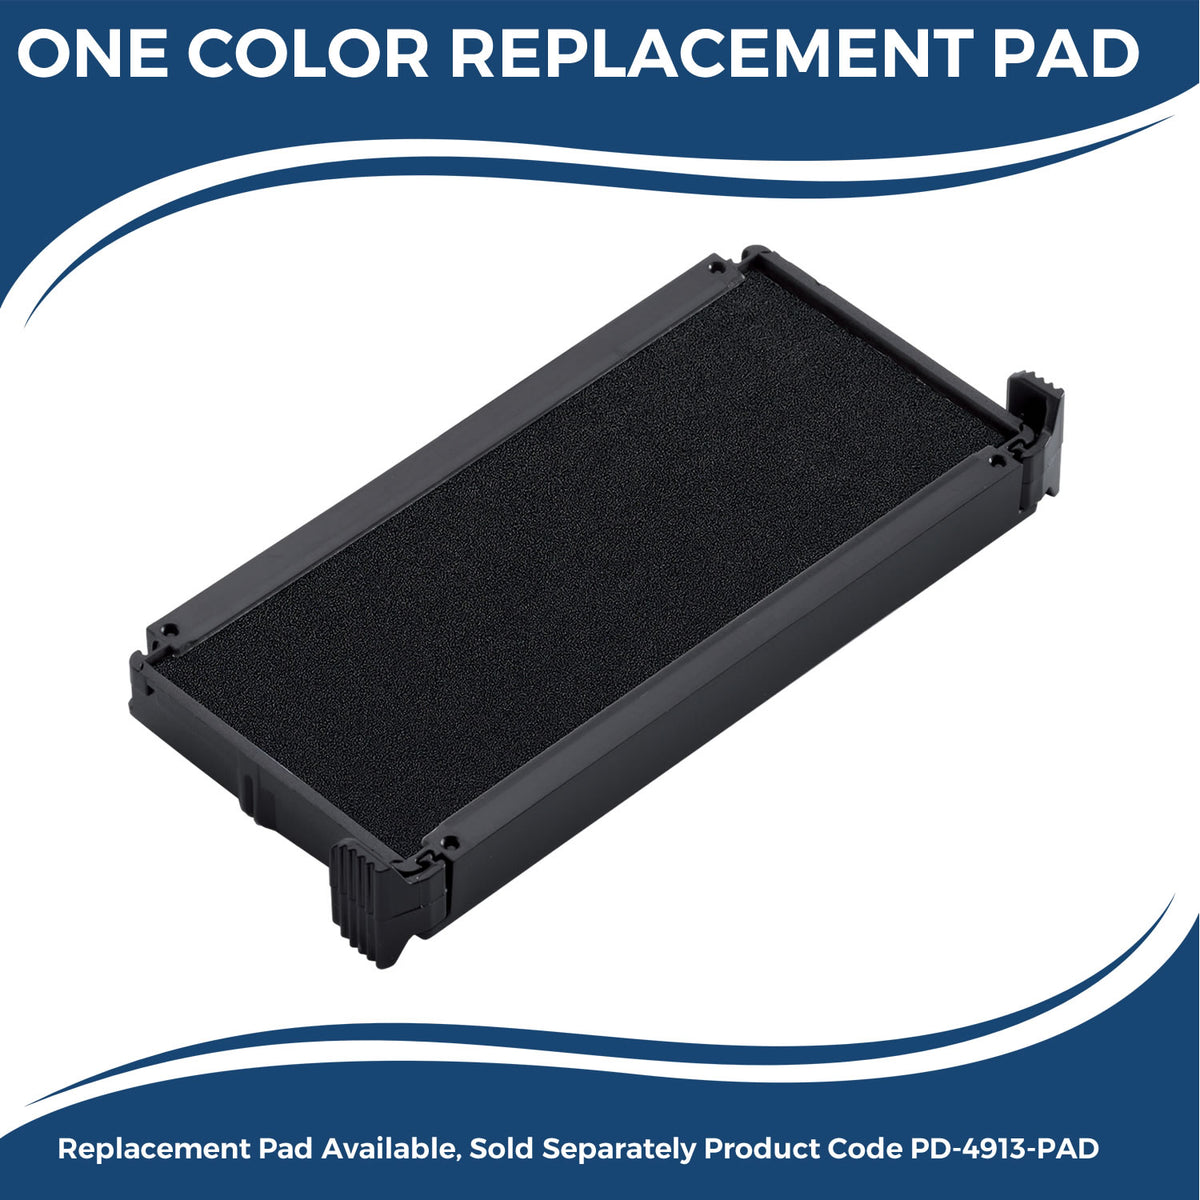 Large Self-Inking Bold File Stamp 4868S Large Replacment Pad